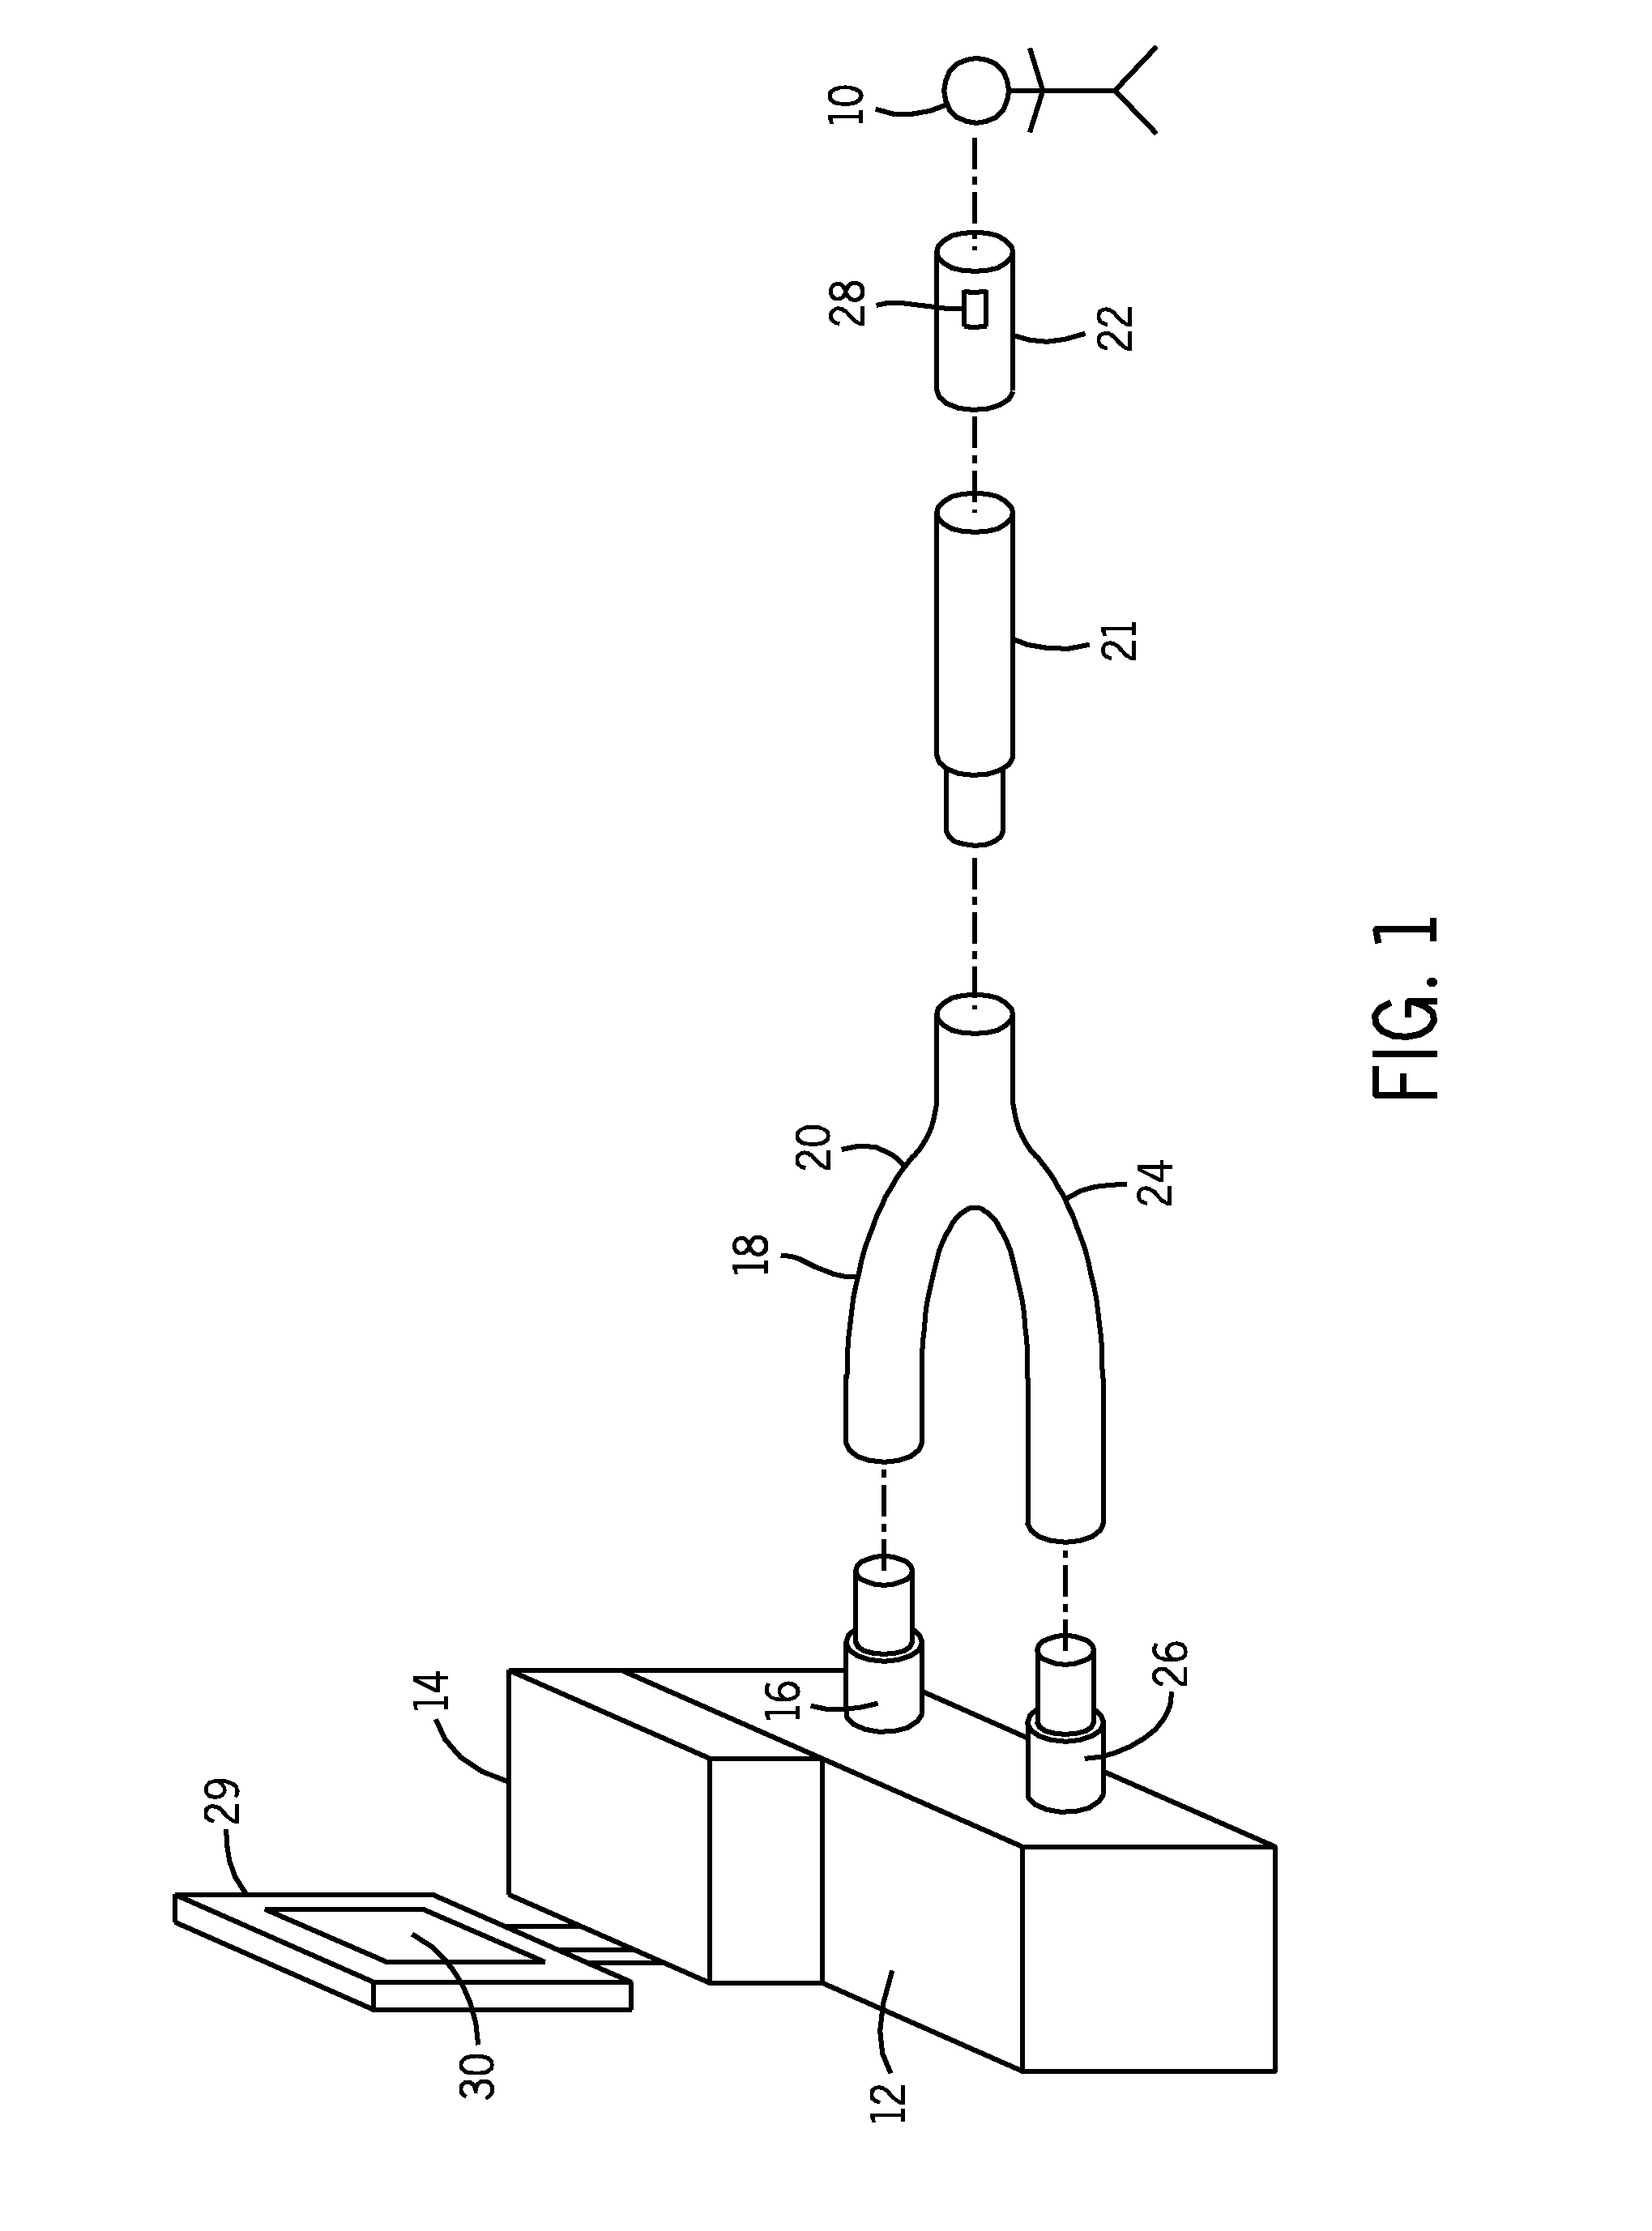 Device and method for graphical mechanical ventilator setup and control